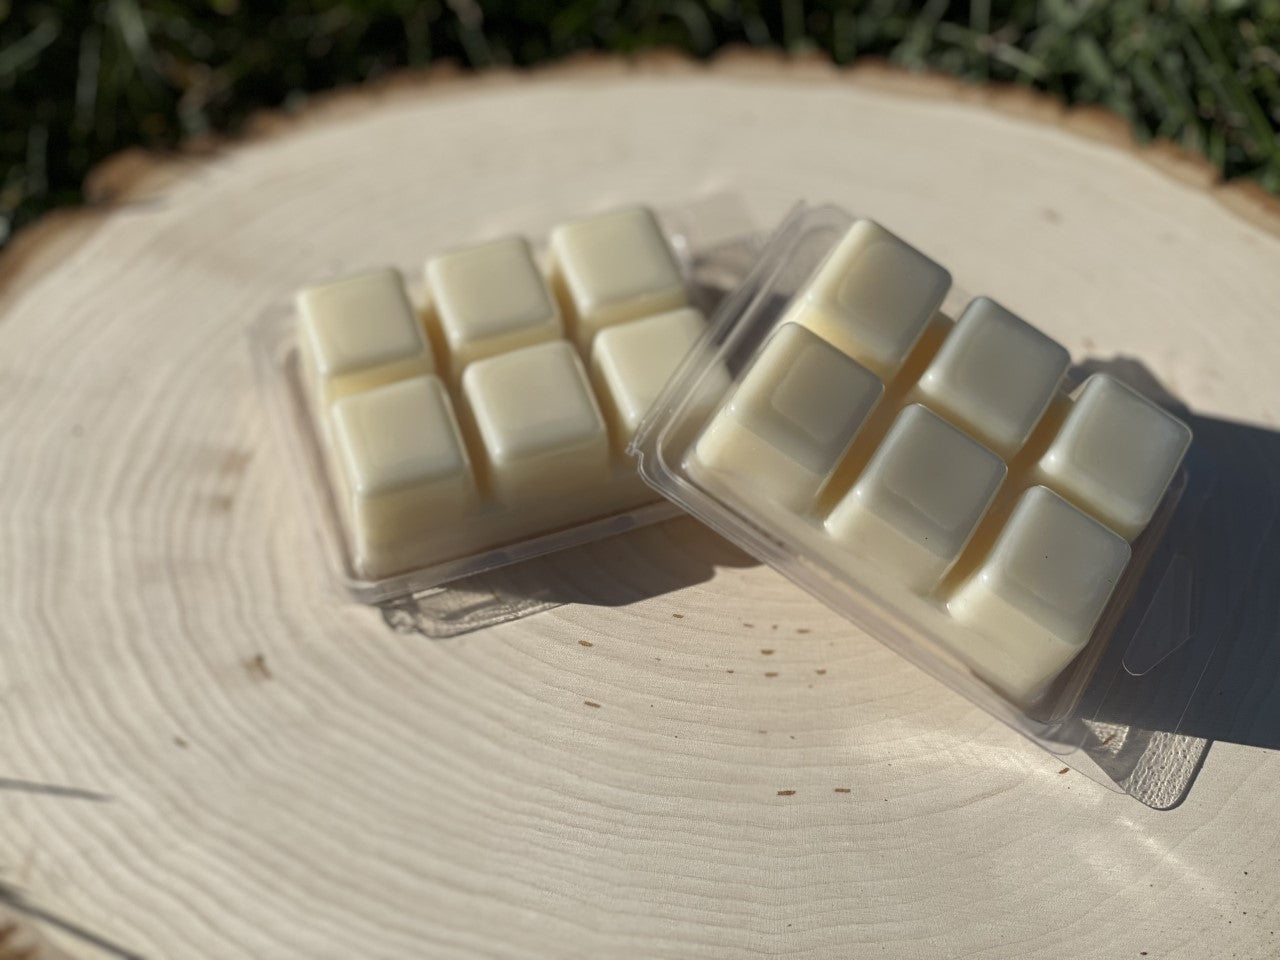 Pineapple & Sage Scented | Pure Soy Wax Melt